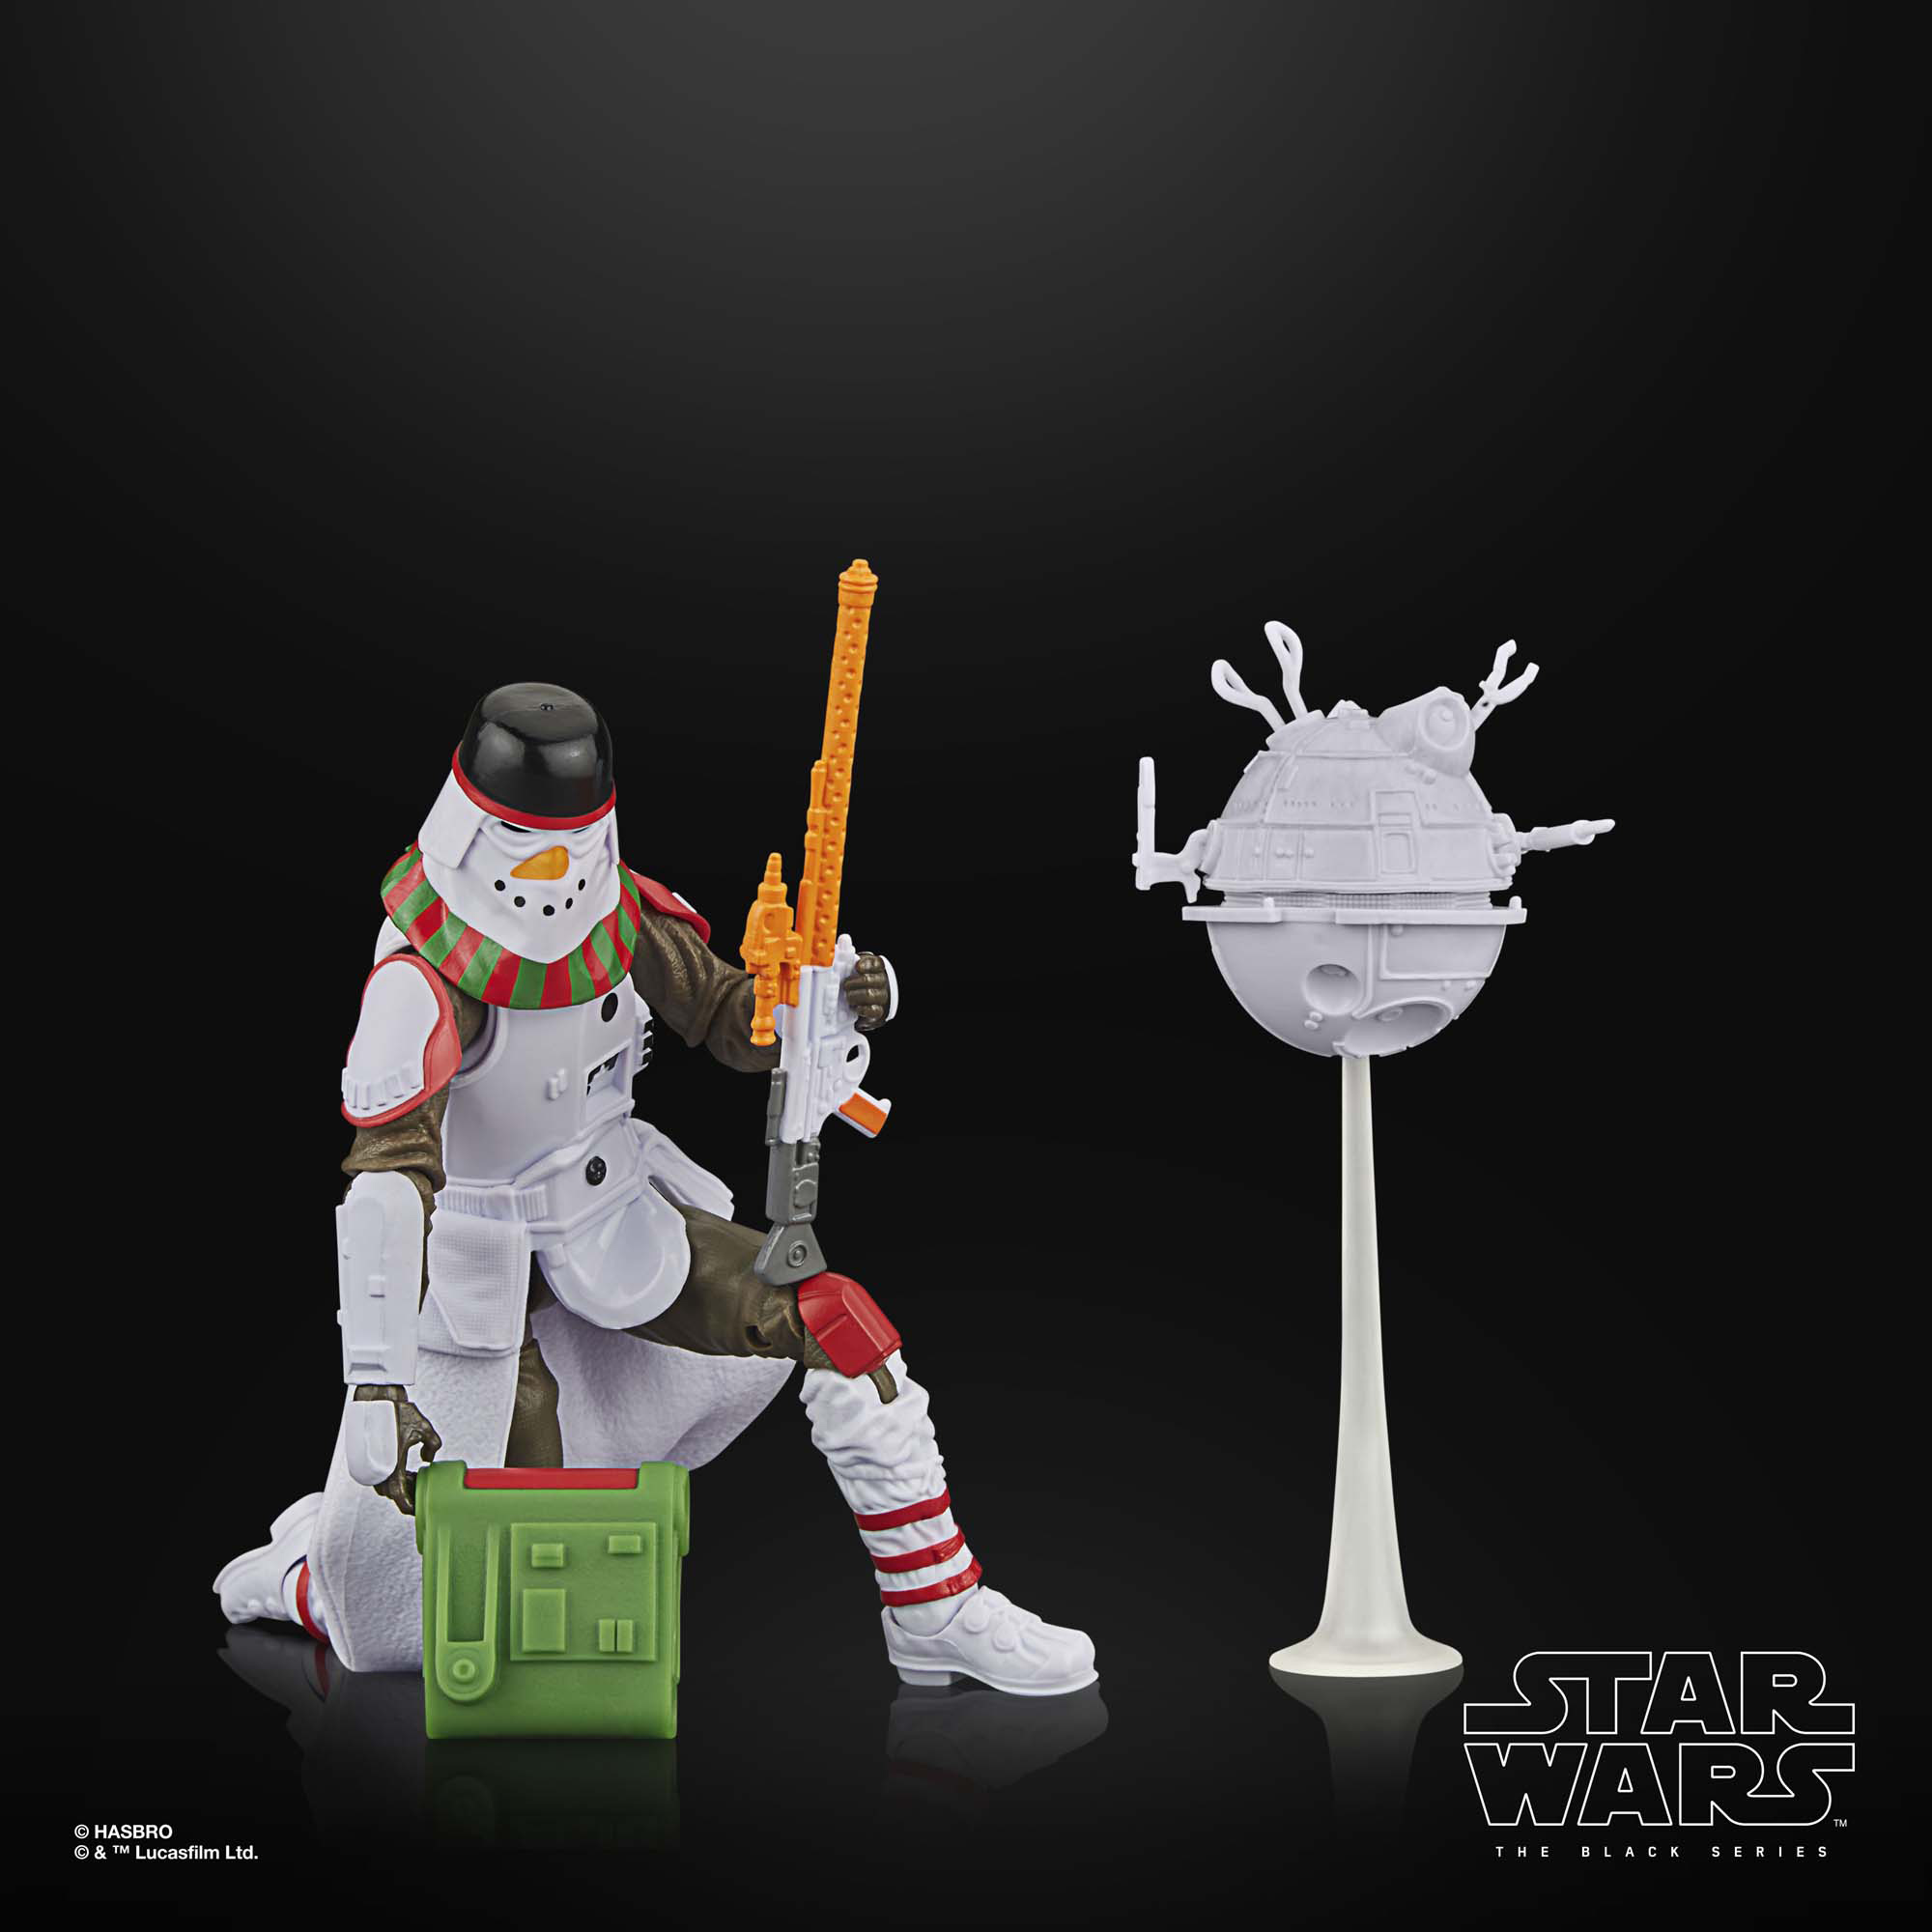 Press Release - New The Black Series 6-Inch 2023 Holiday Edition Figures